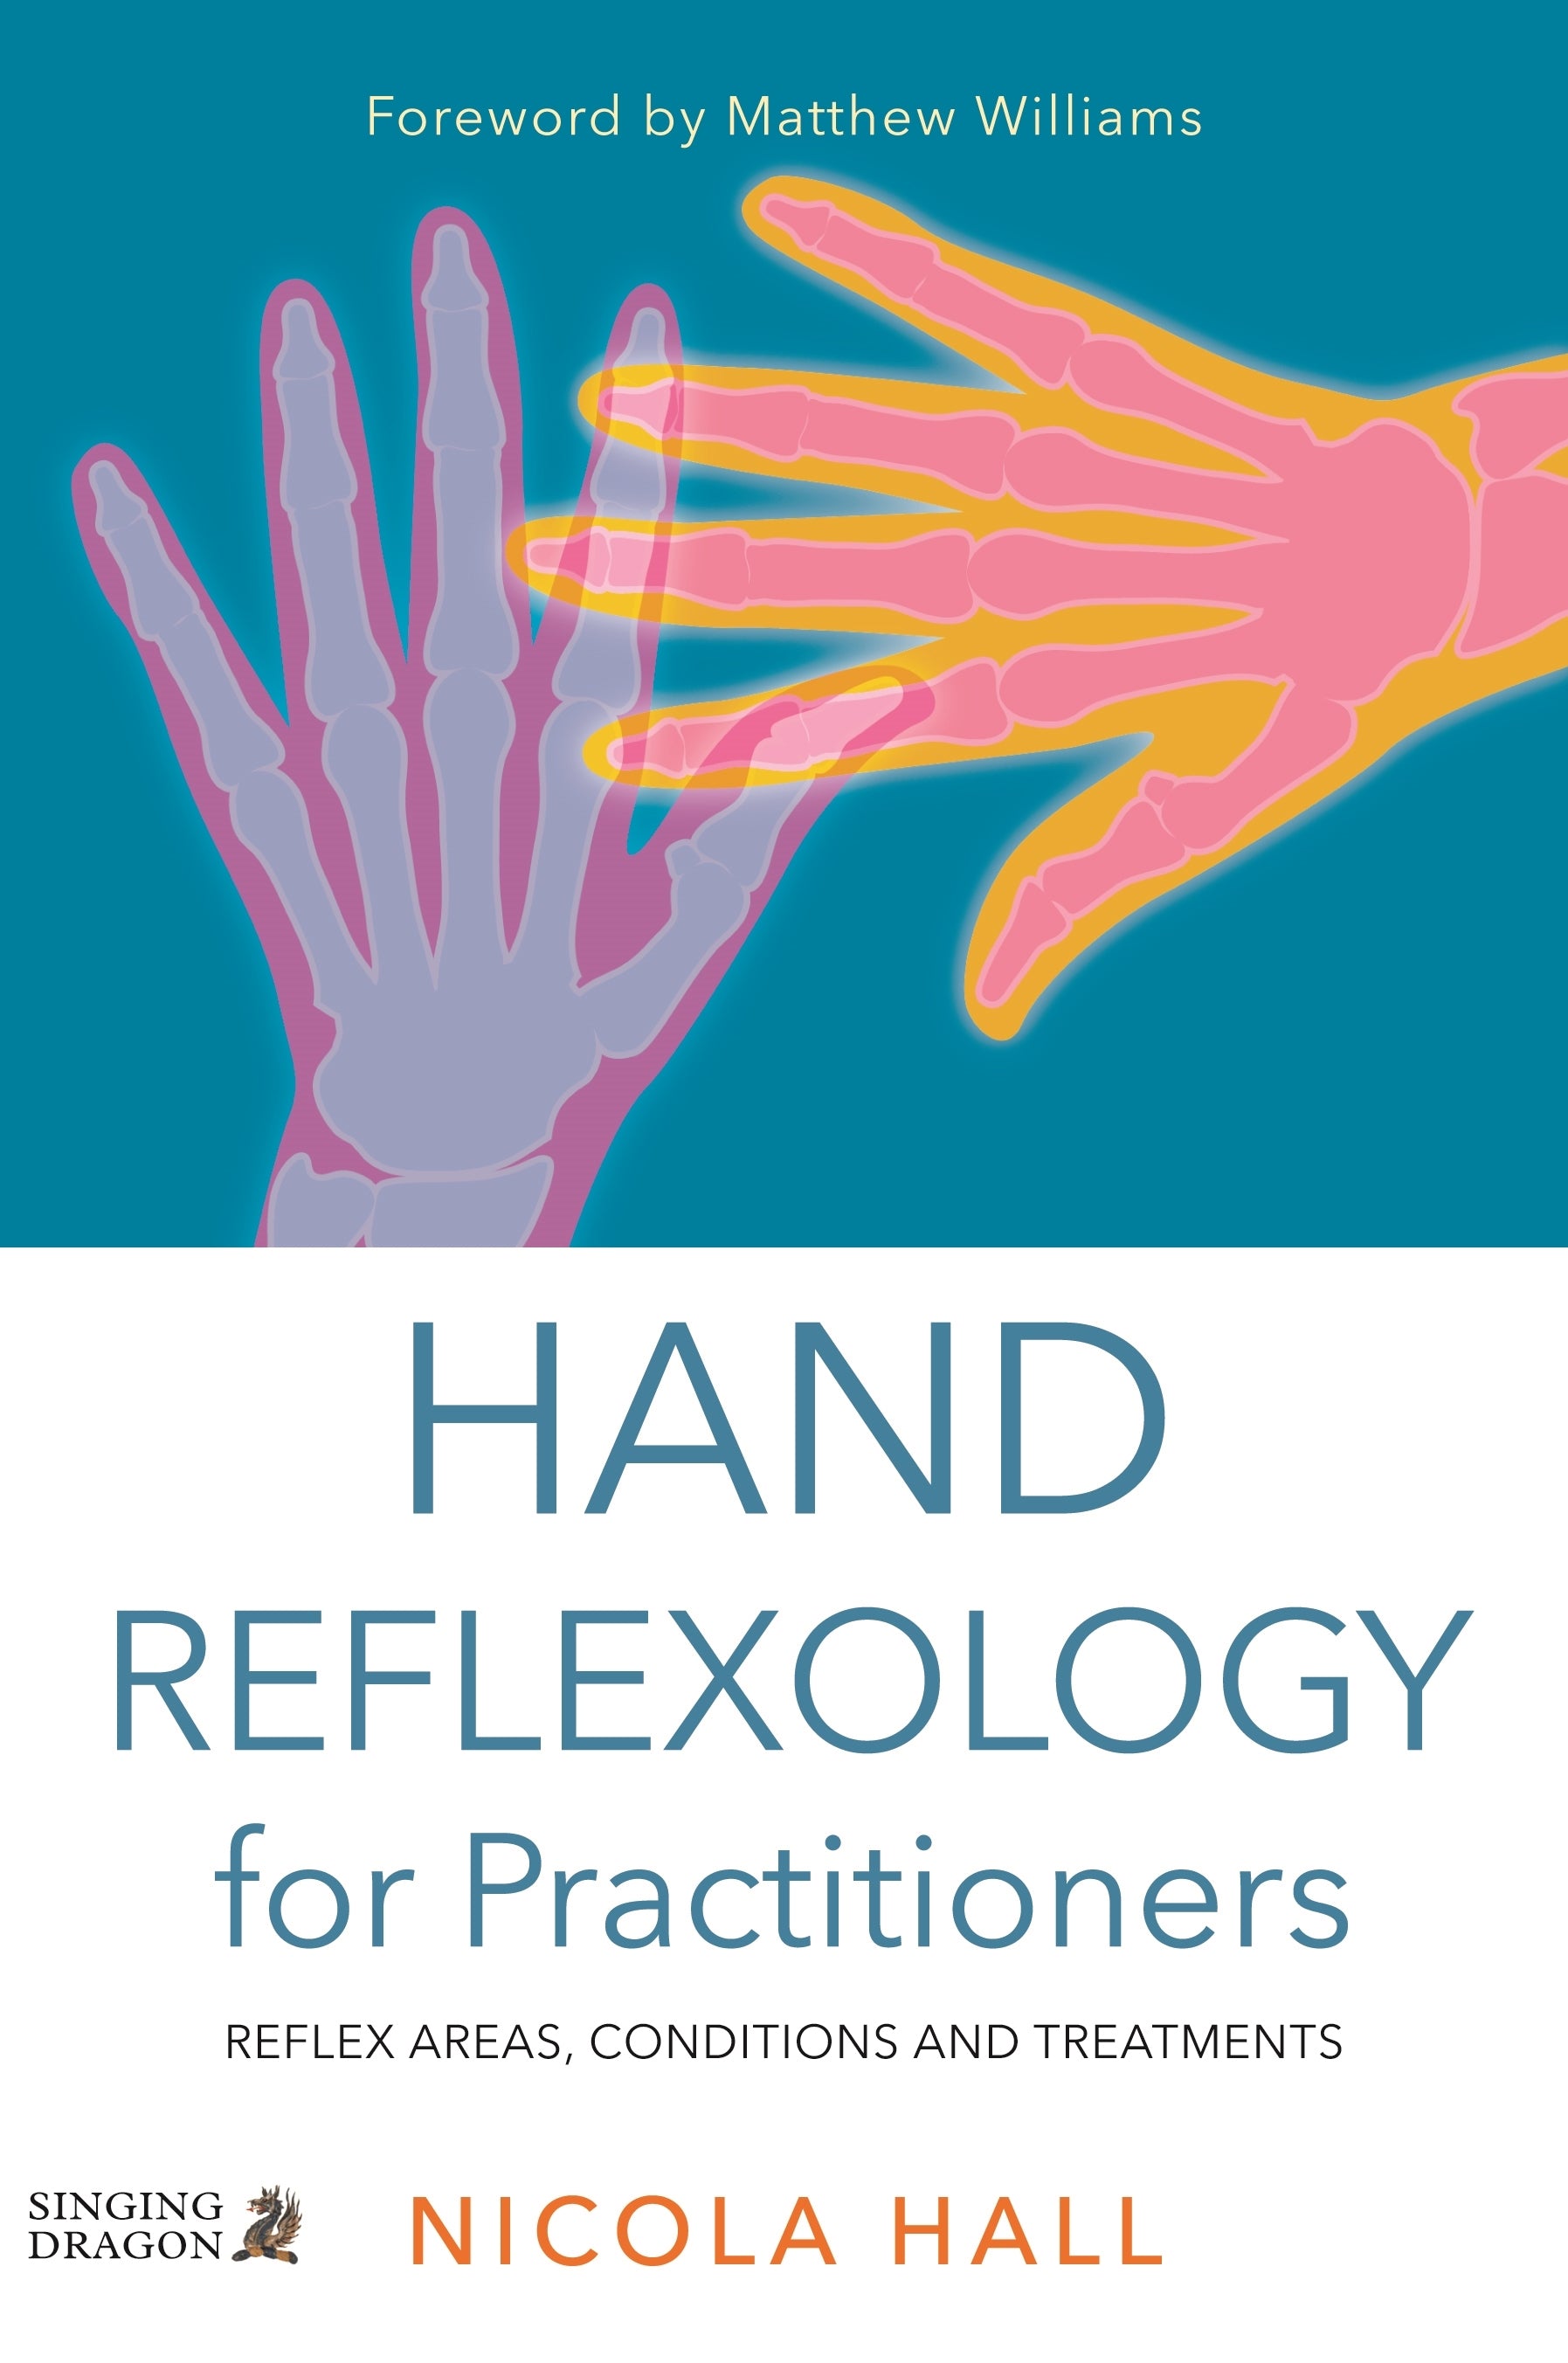 Hand Reflexology for Practitioners by Nicola Hall, Matthew Williams